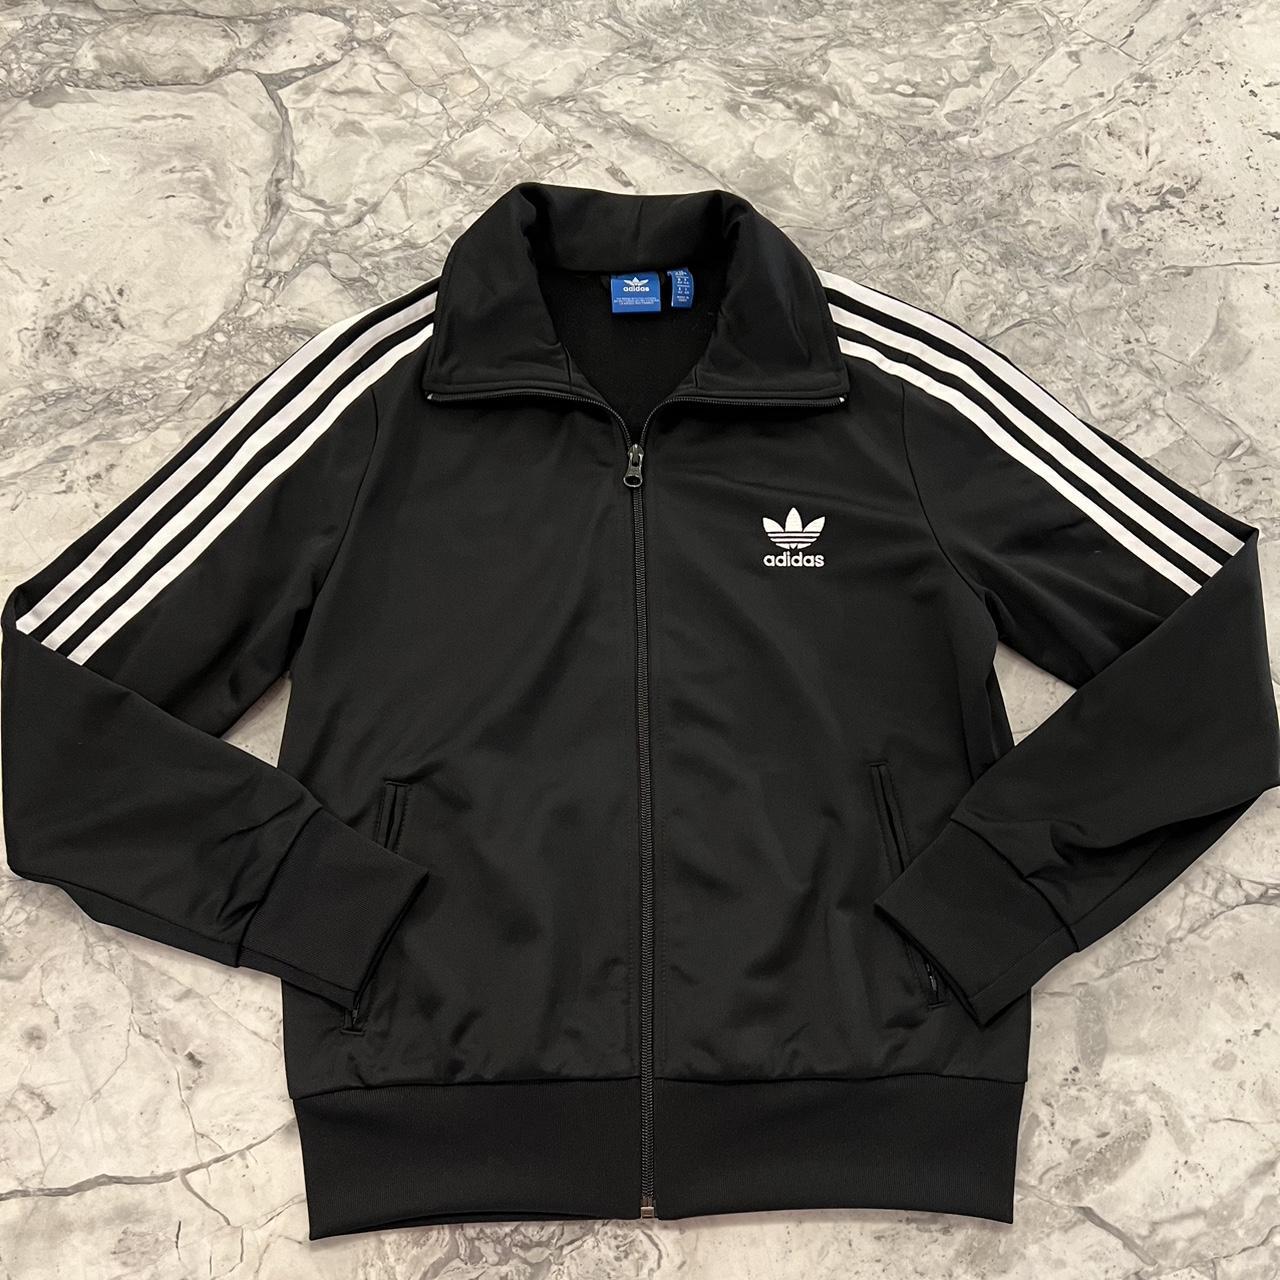 adidas trainer jacket -two front pockets -adidas... - Depop